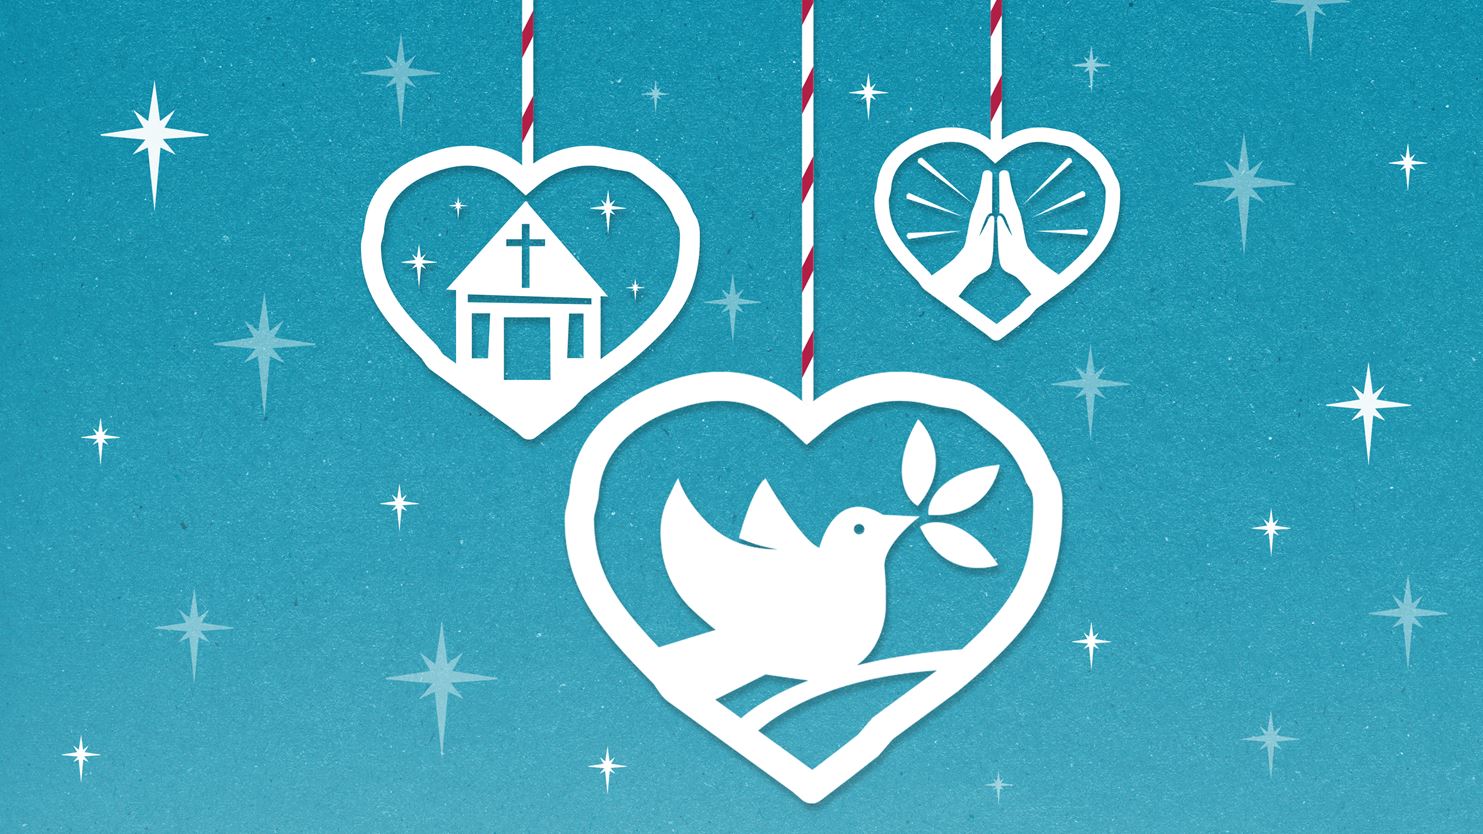 Illustration of three hanging Christmas decorations, one in the shape of a church, one in the shape of a dove and one in the shape of hands in a prayer postion.